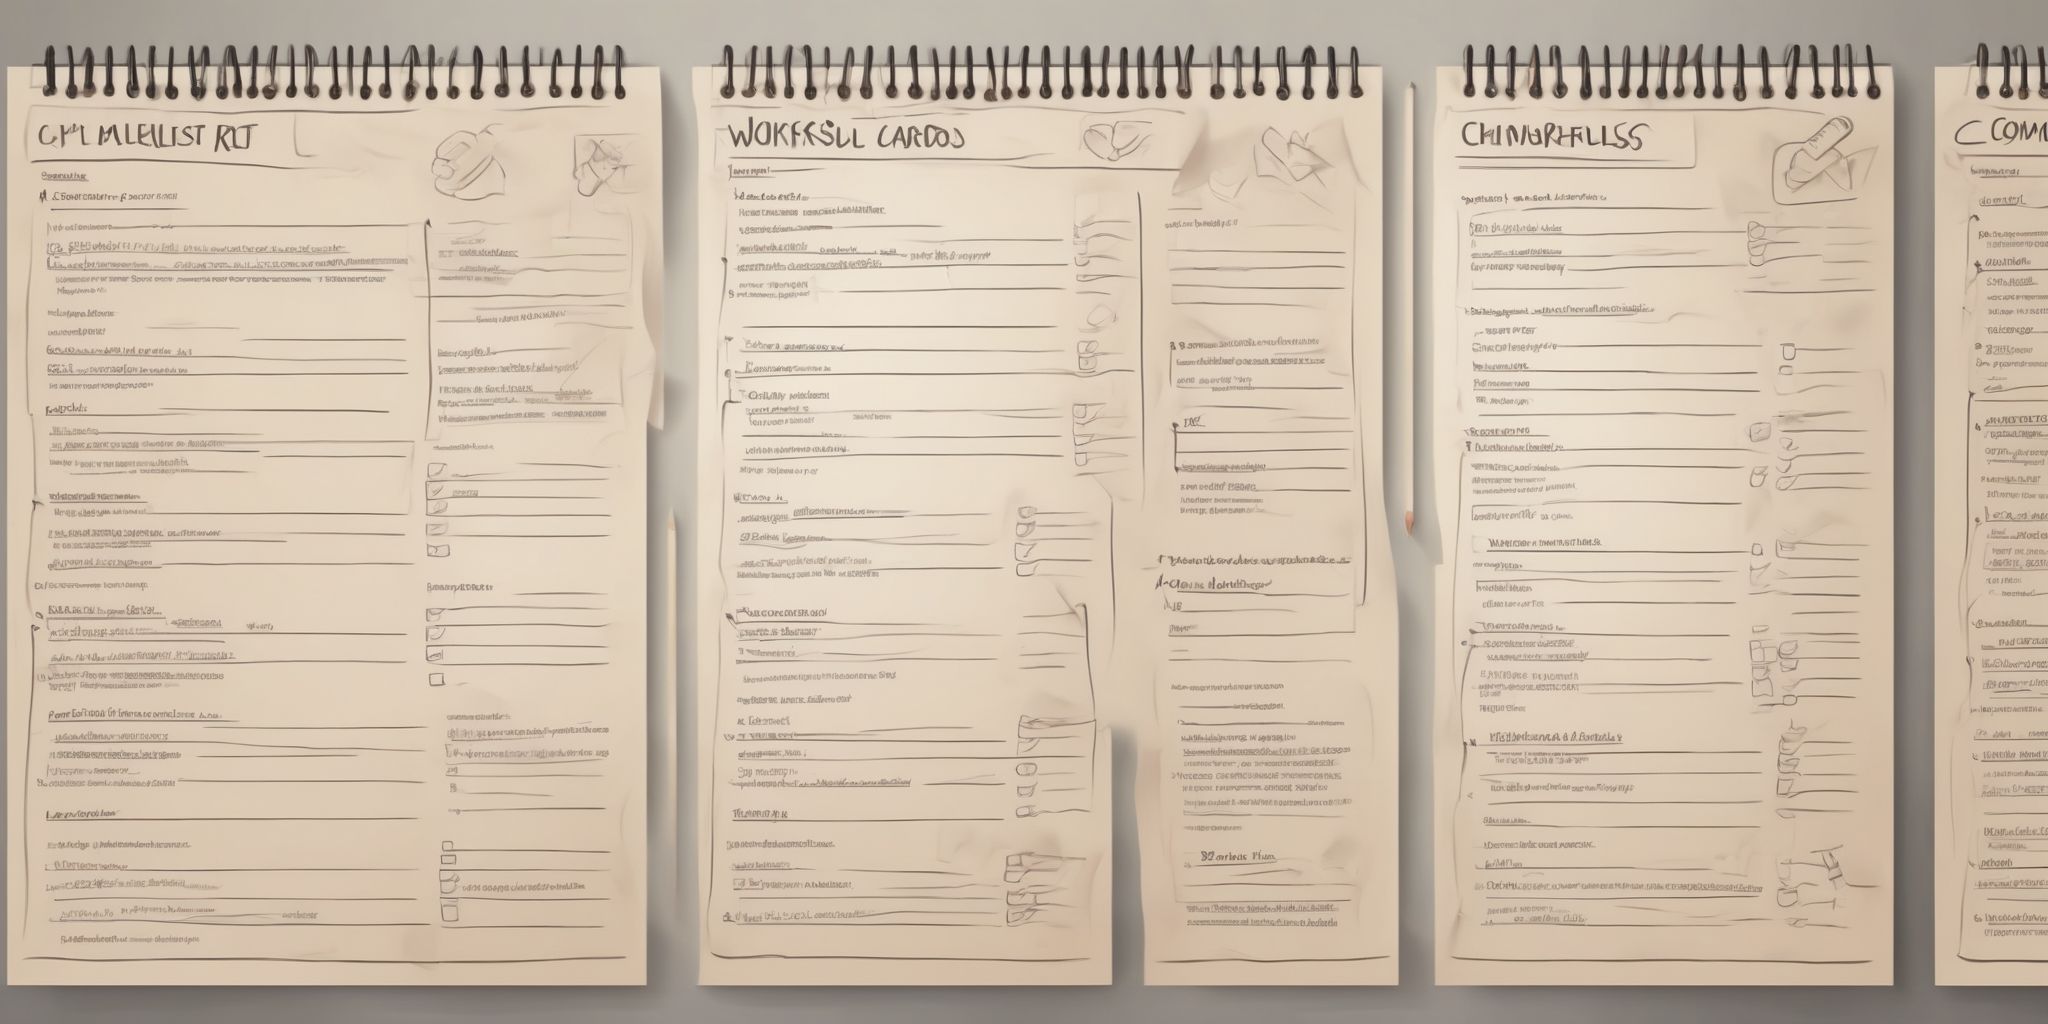 Checklist  in realistic, photographic style